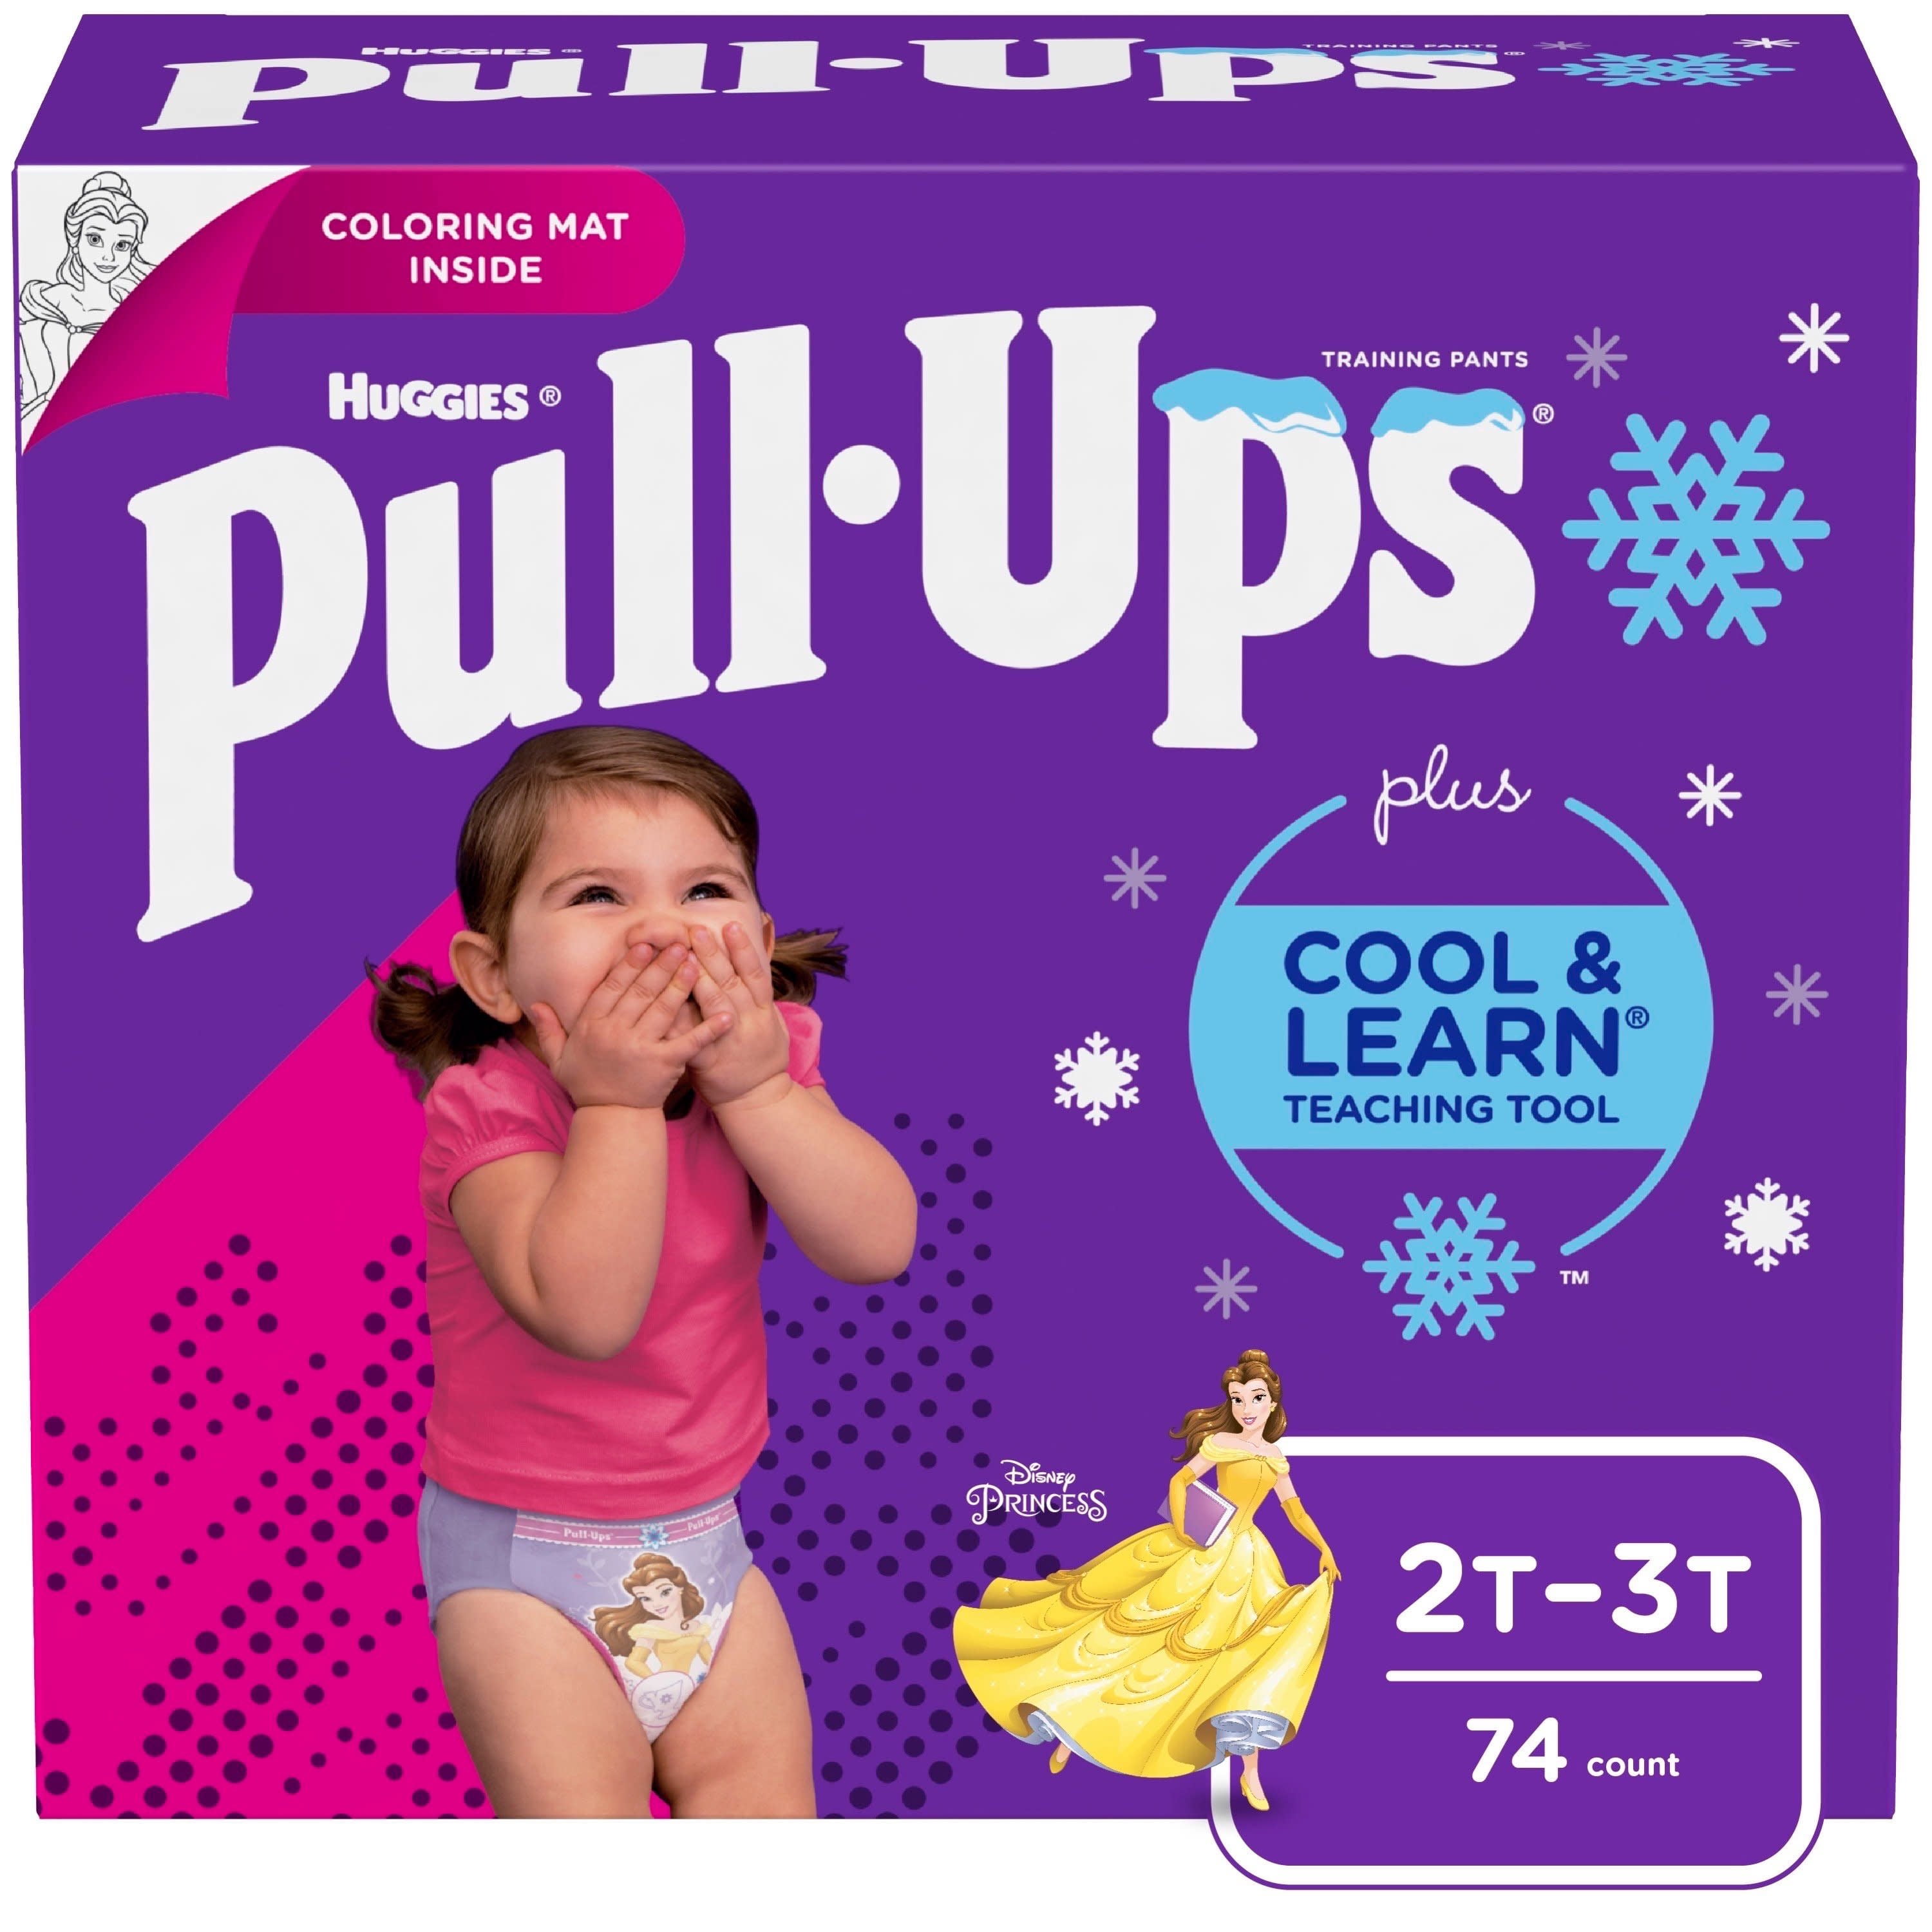 Huggies Pull-Ups Training Pants with Cool and Learn for Girls 74 Count Size 2T-3T 